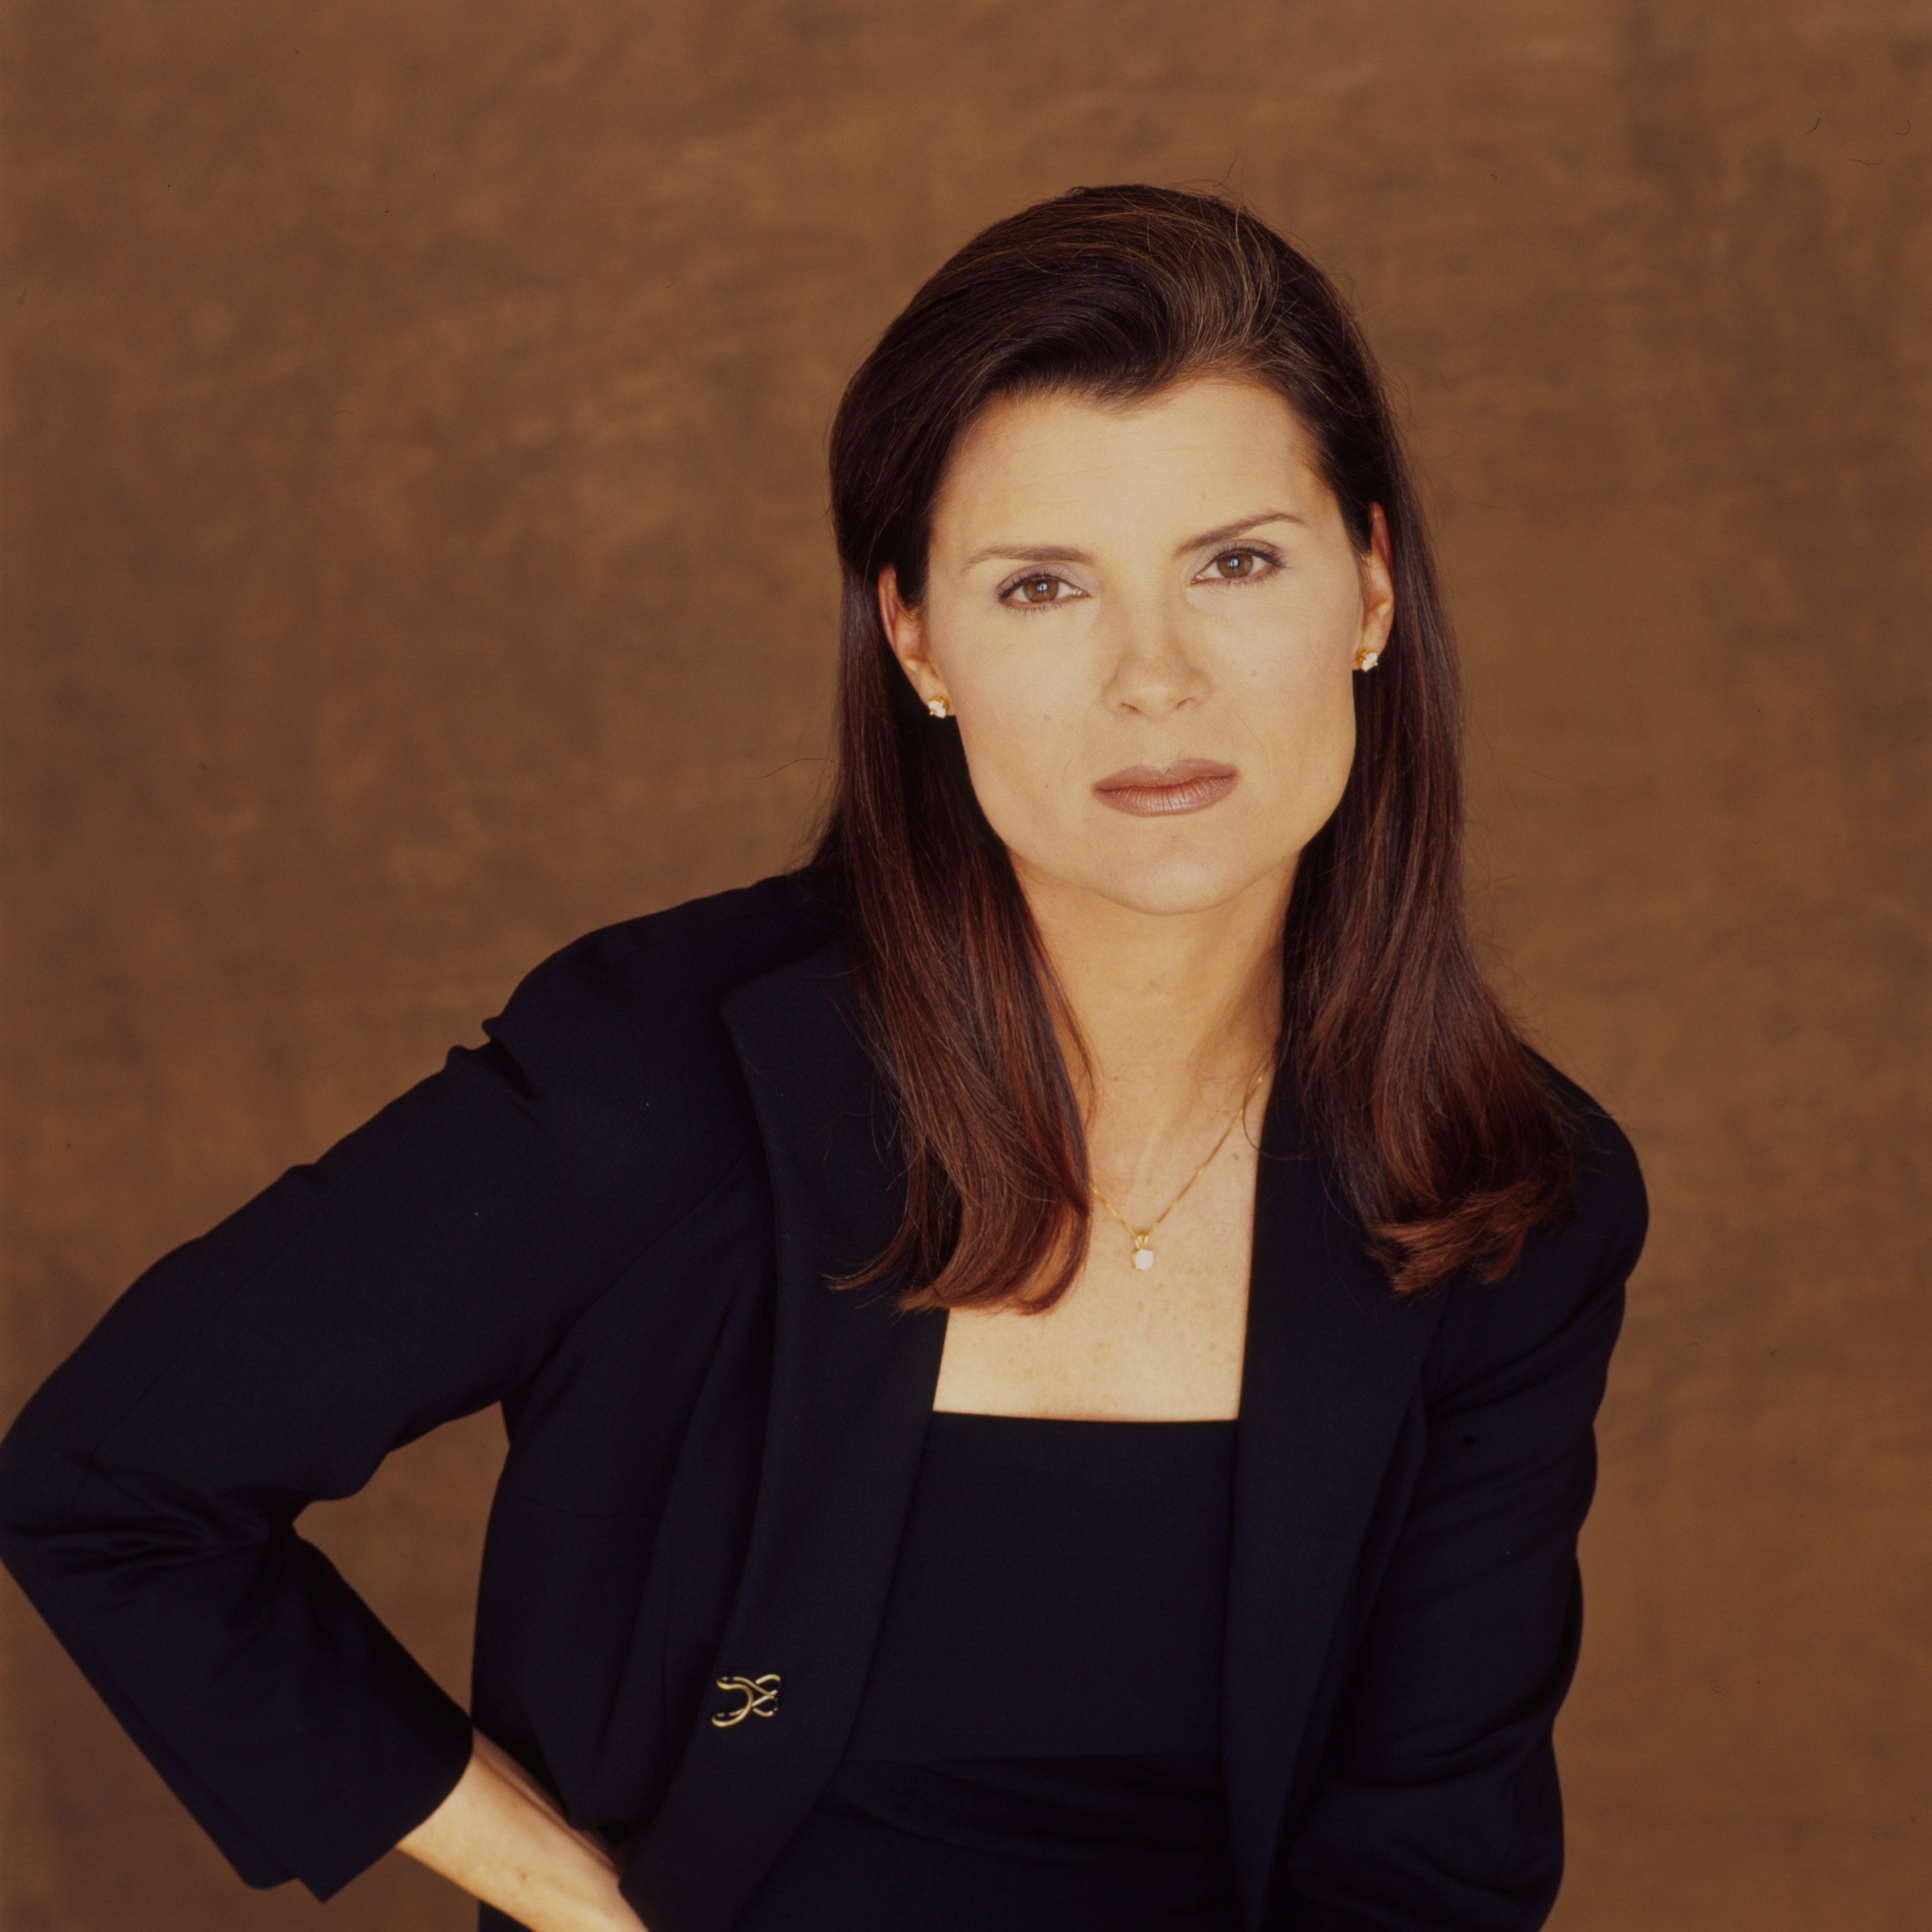 'The Bold and the Beautiful' actor Kimberlin Brown wearing a navy blue suit, and standing in front of a brown backdrop.